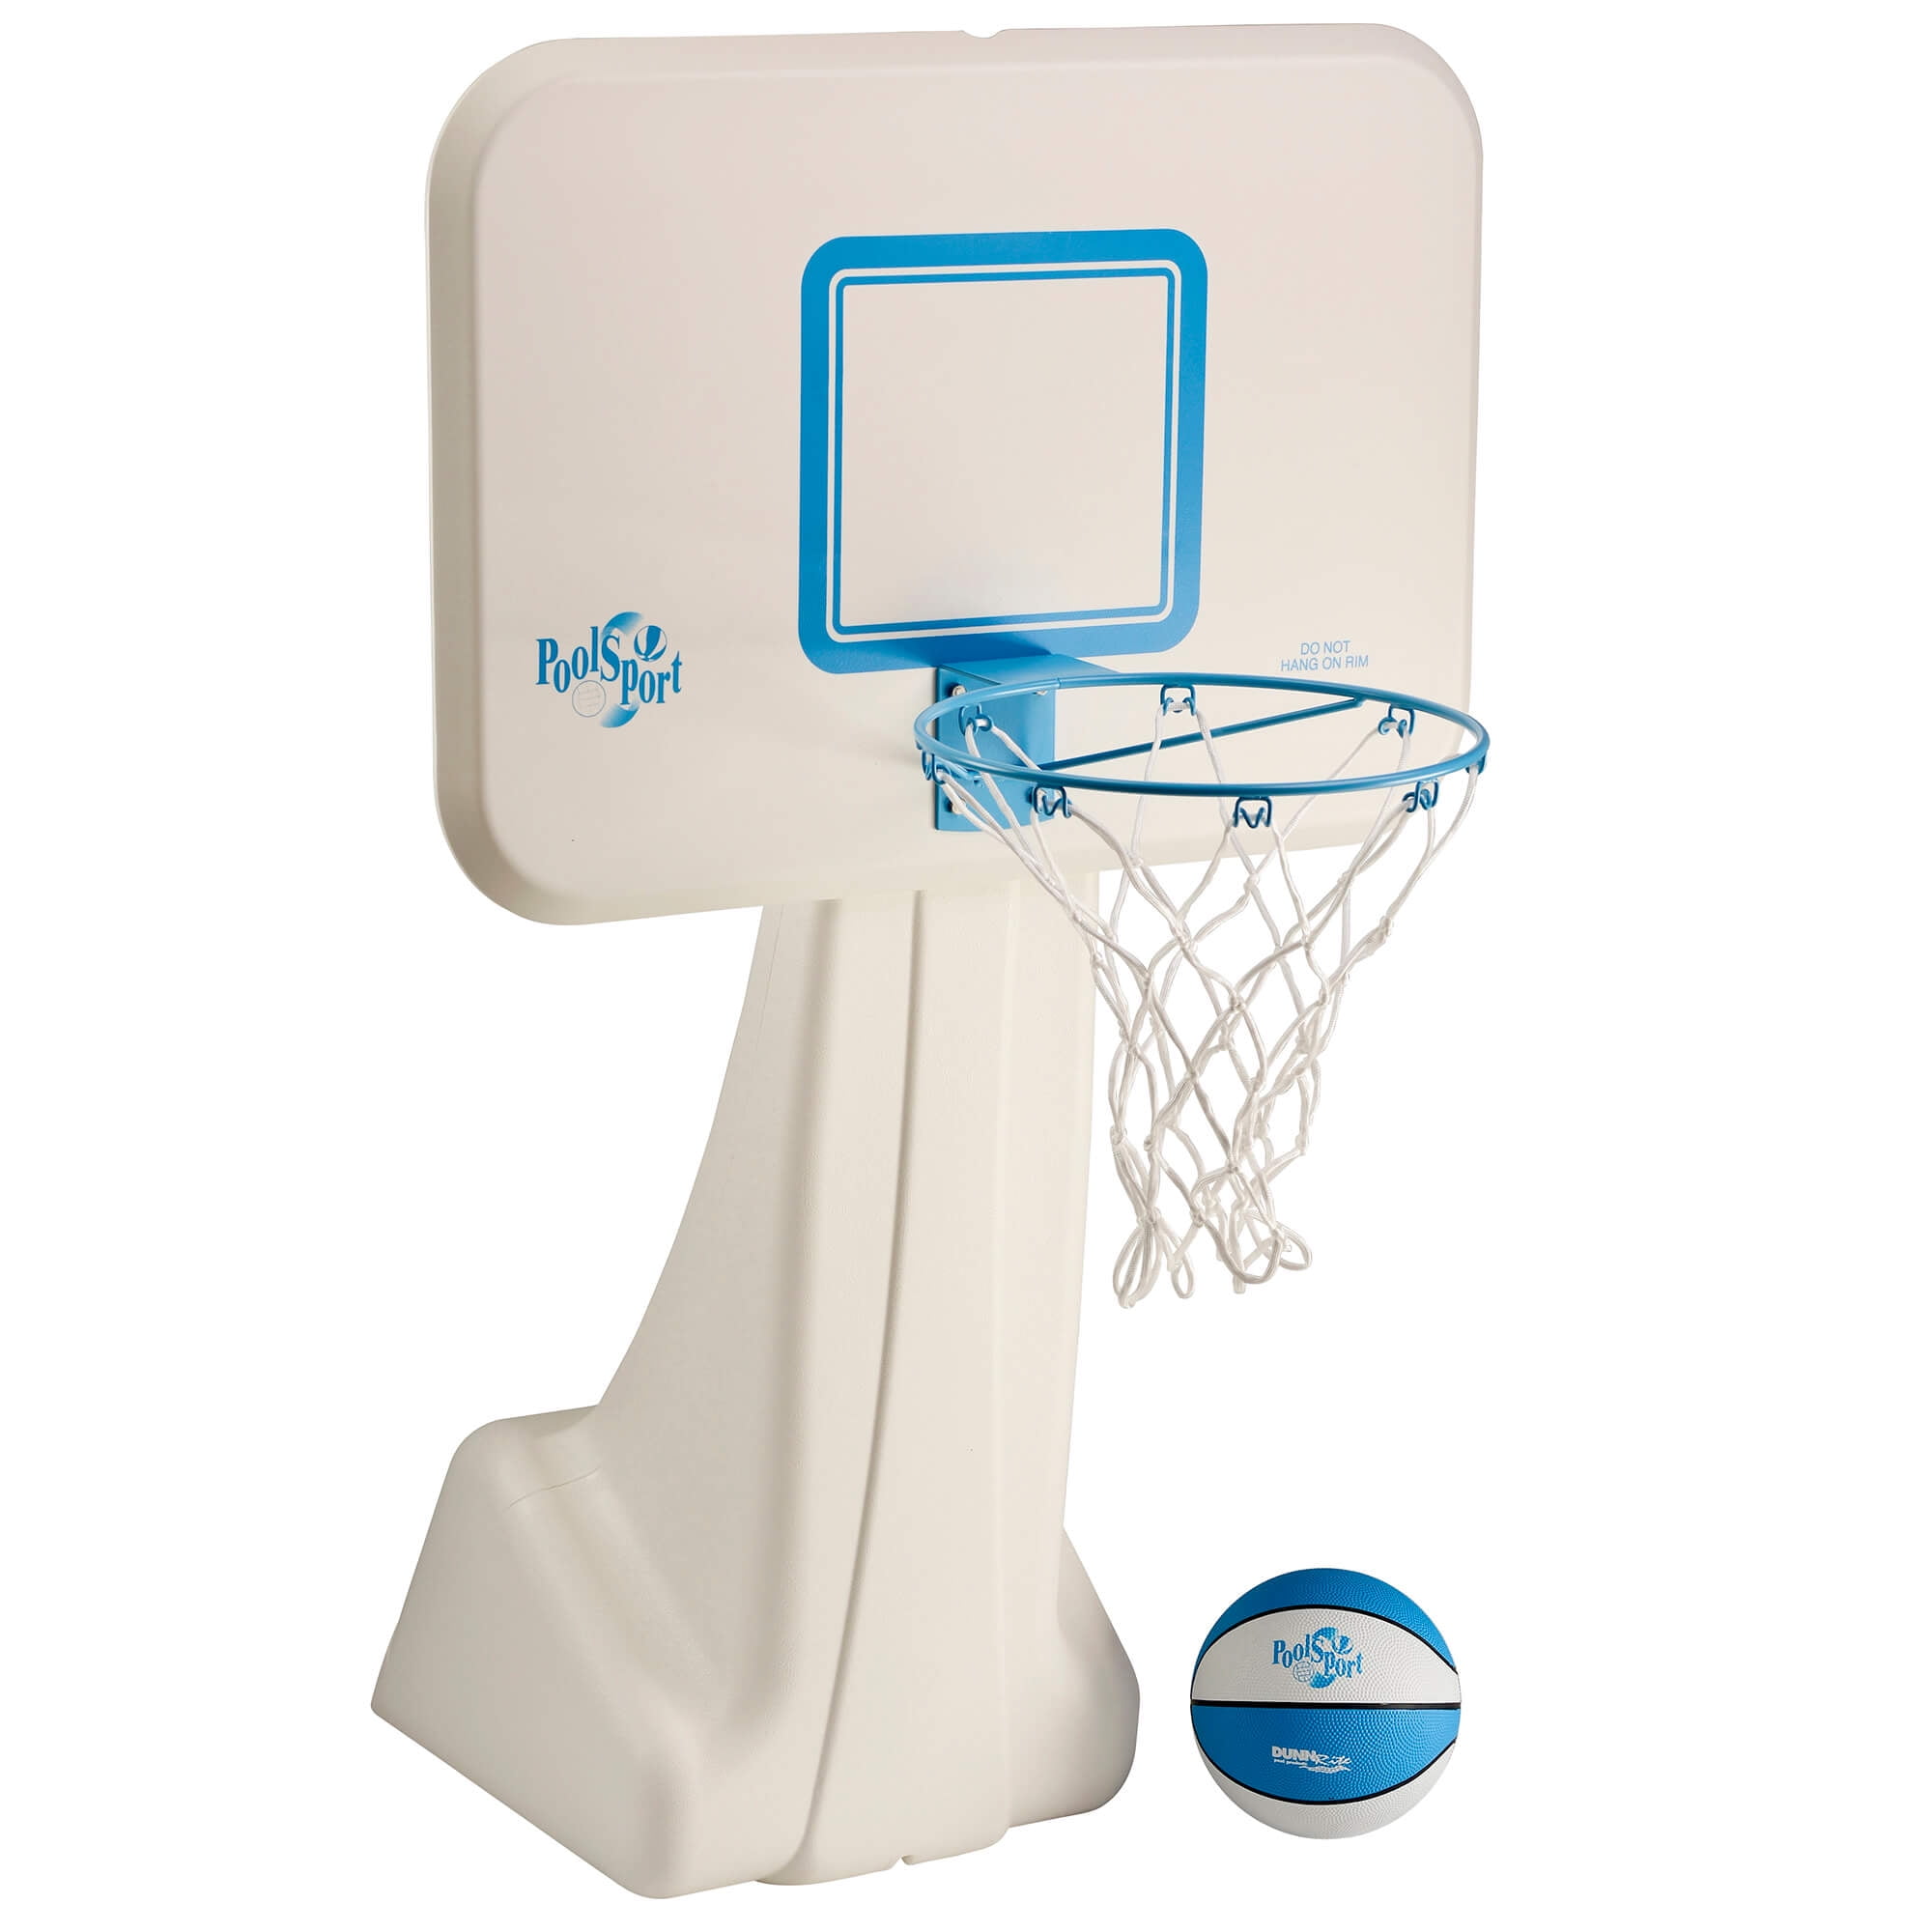 Dunn-Rite Pool Sport poolside basketball unit. The Dunn-Rite Pool Sport  Portable Pool Basketball Hoop (B950) features a color-matched ball textured  ball, 13.5